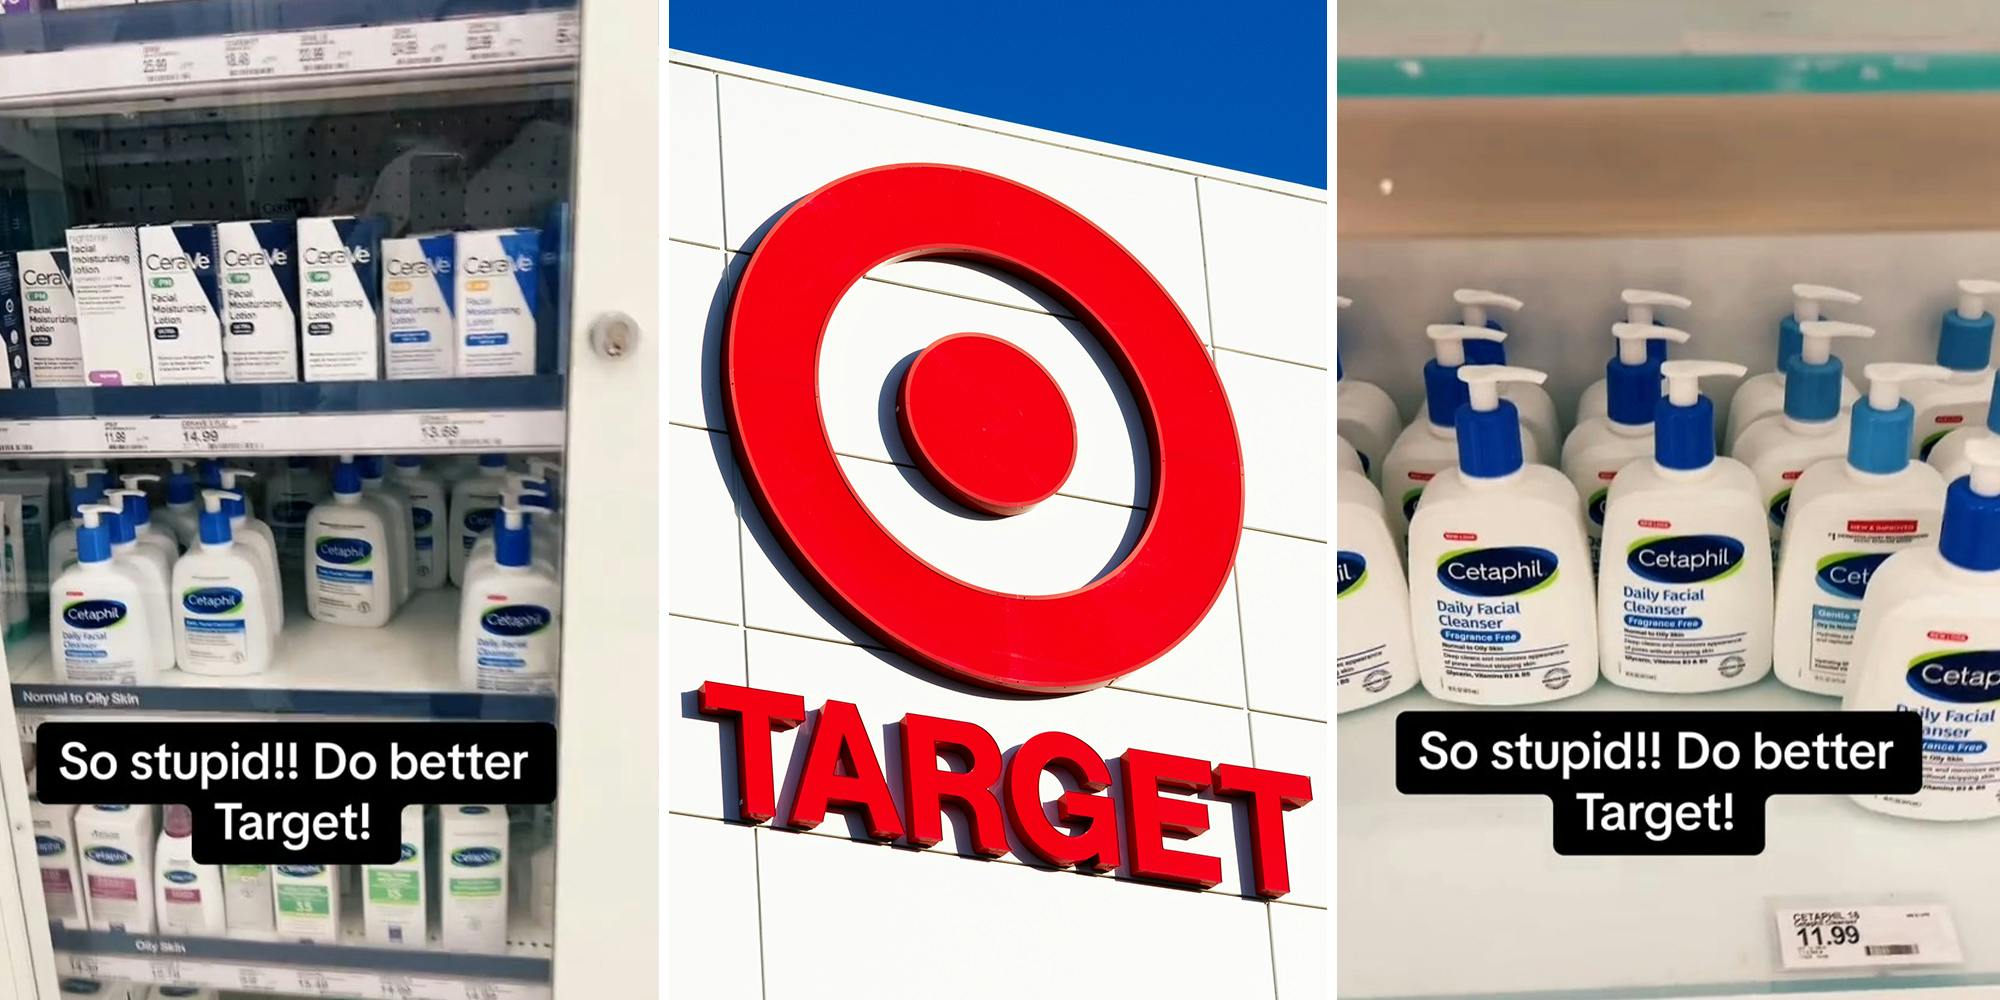 ‘They said y’all can steal some of it’: Shopper mocks Target for locking up only half of Cetaphil products